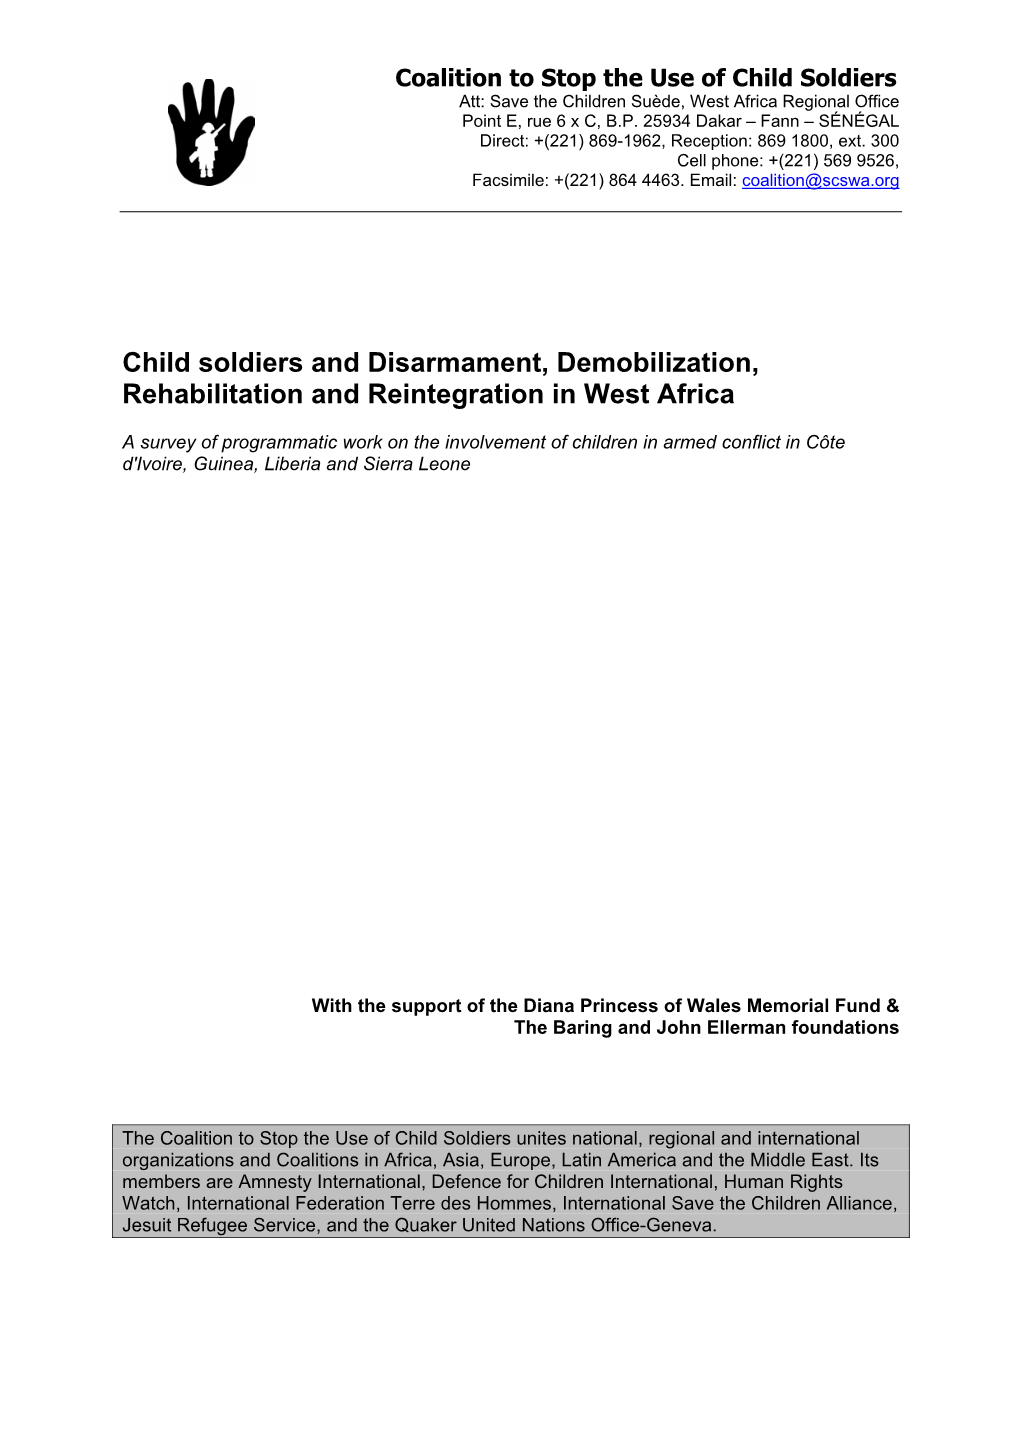 Child Soldiers and Disarmament, Demobilization, Rehabilitation and Reintegration in West Africa